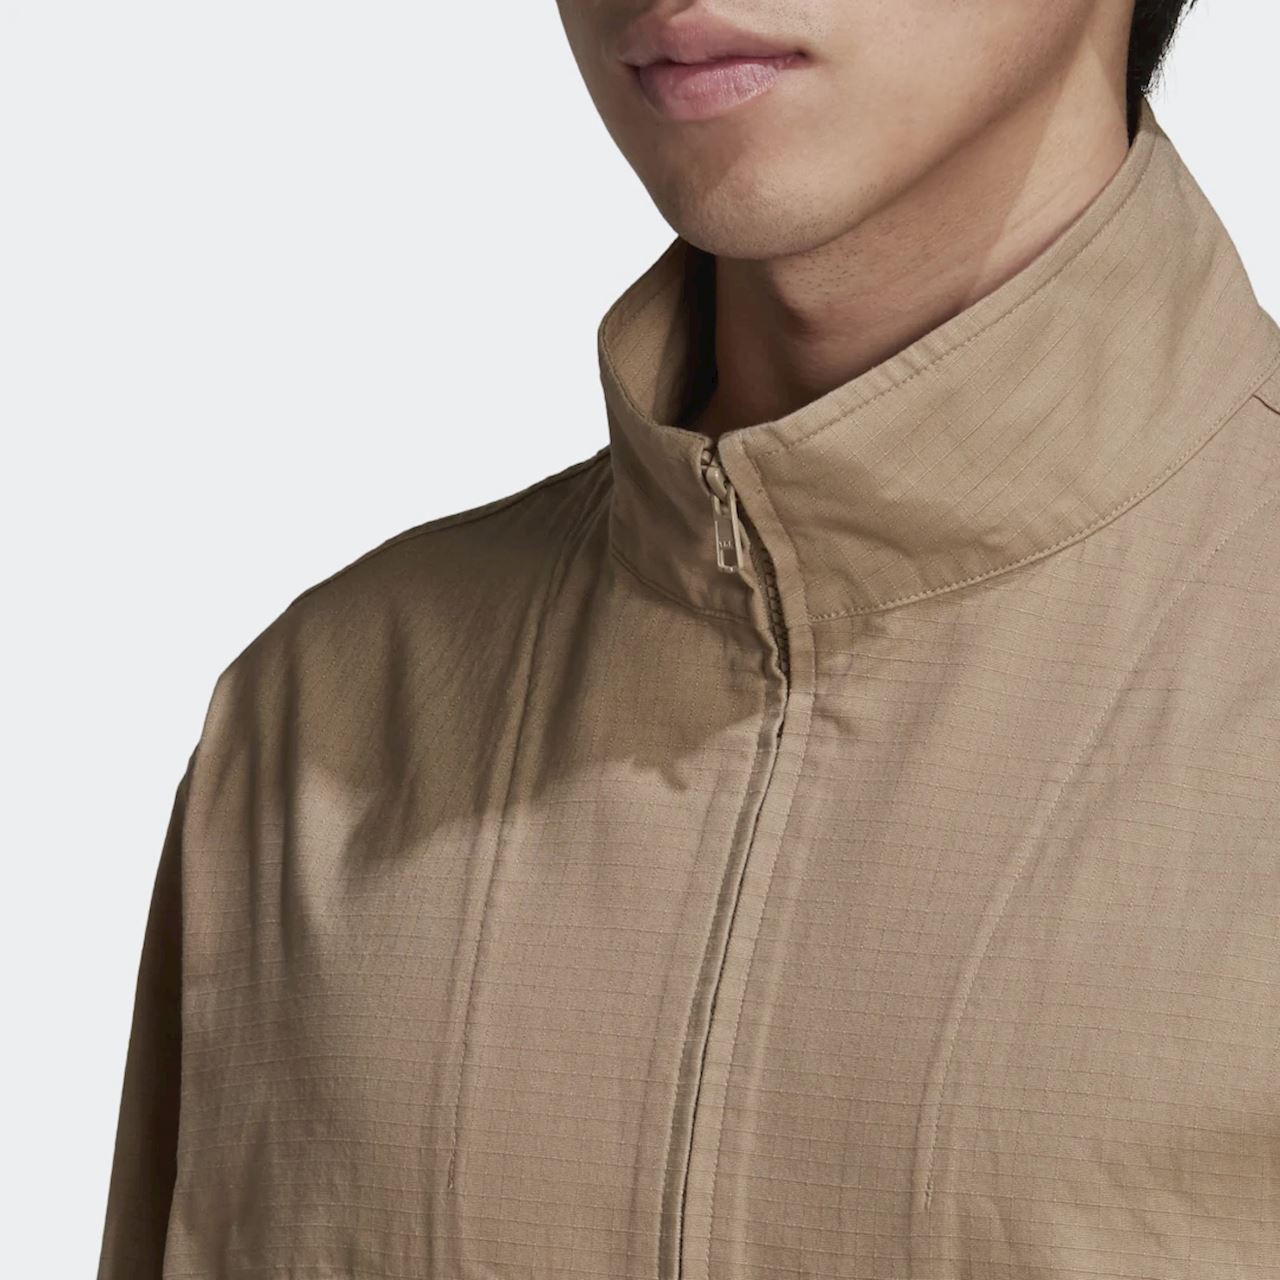 tradesports.co.uk Adidas Y-3 Men's Chapter 3 Utility Jacket - Brown